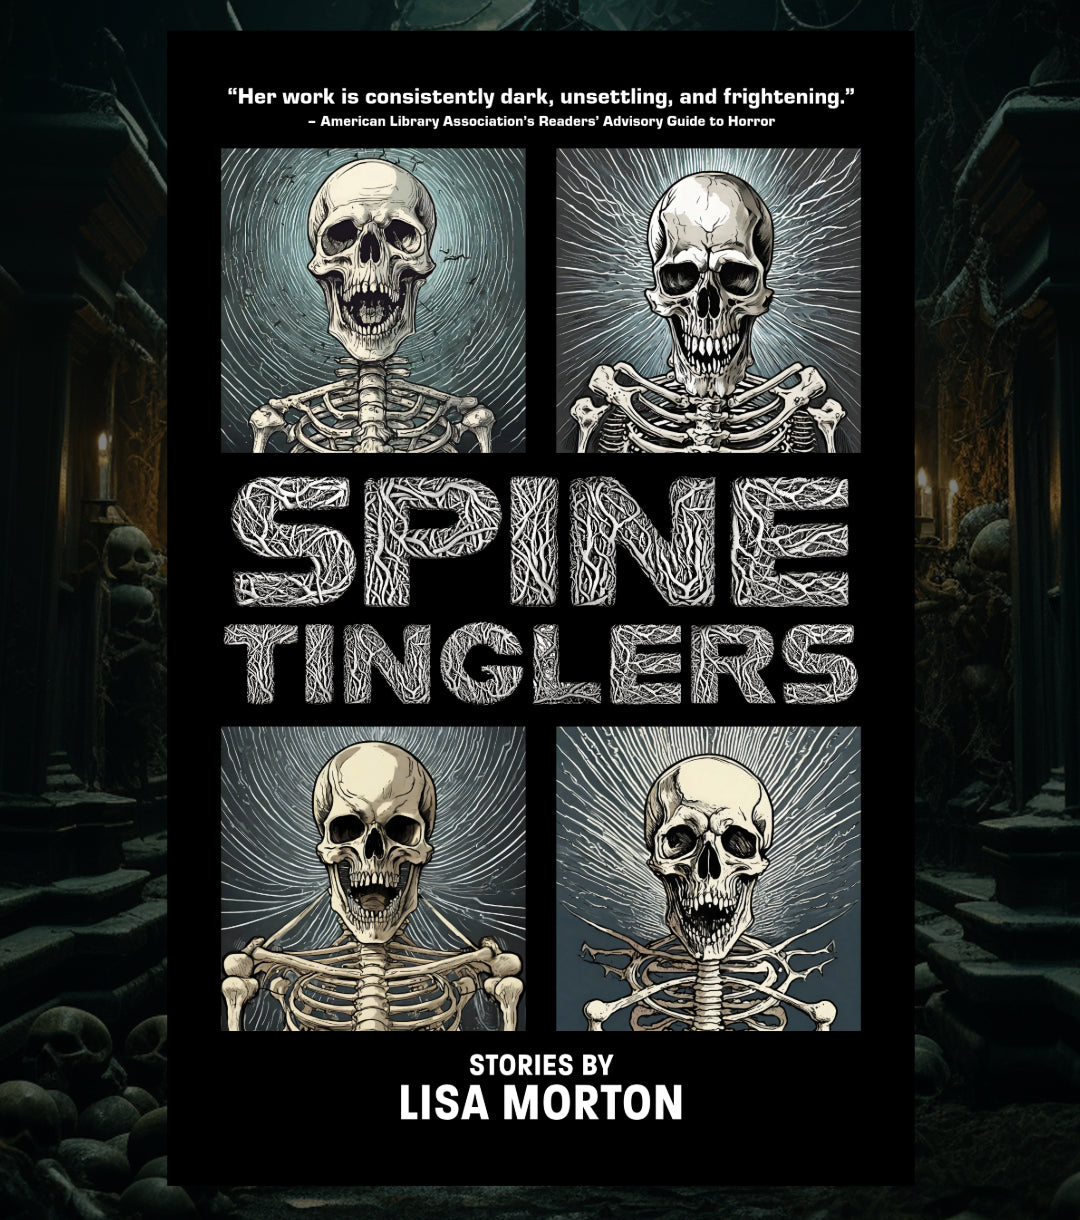 Special Offer! Spine Tinglers by Lisa Morton, Signed by Author PLUS "Spiny Pen"